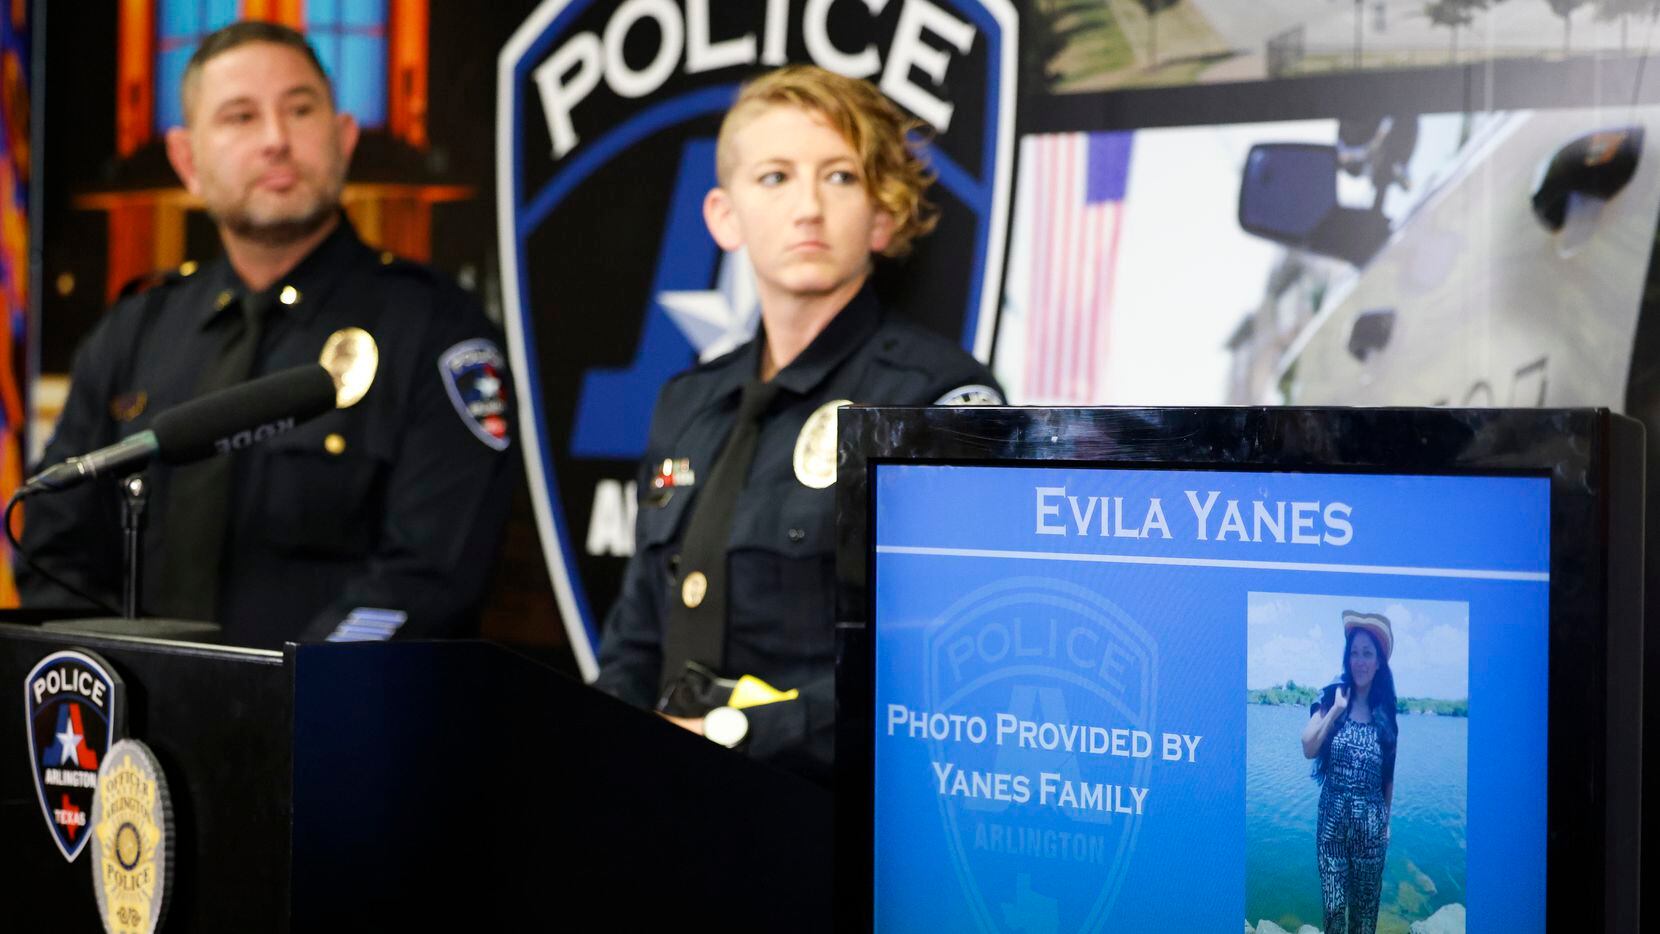 A photo of 44-year-old Evila Yanes is displayed on the screen as Detective Krystallyne...